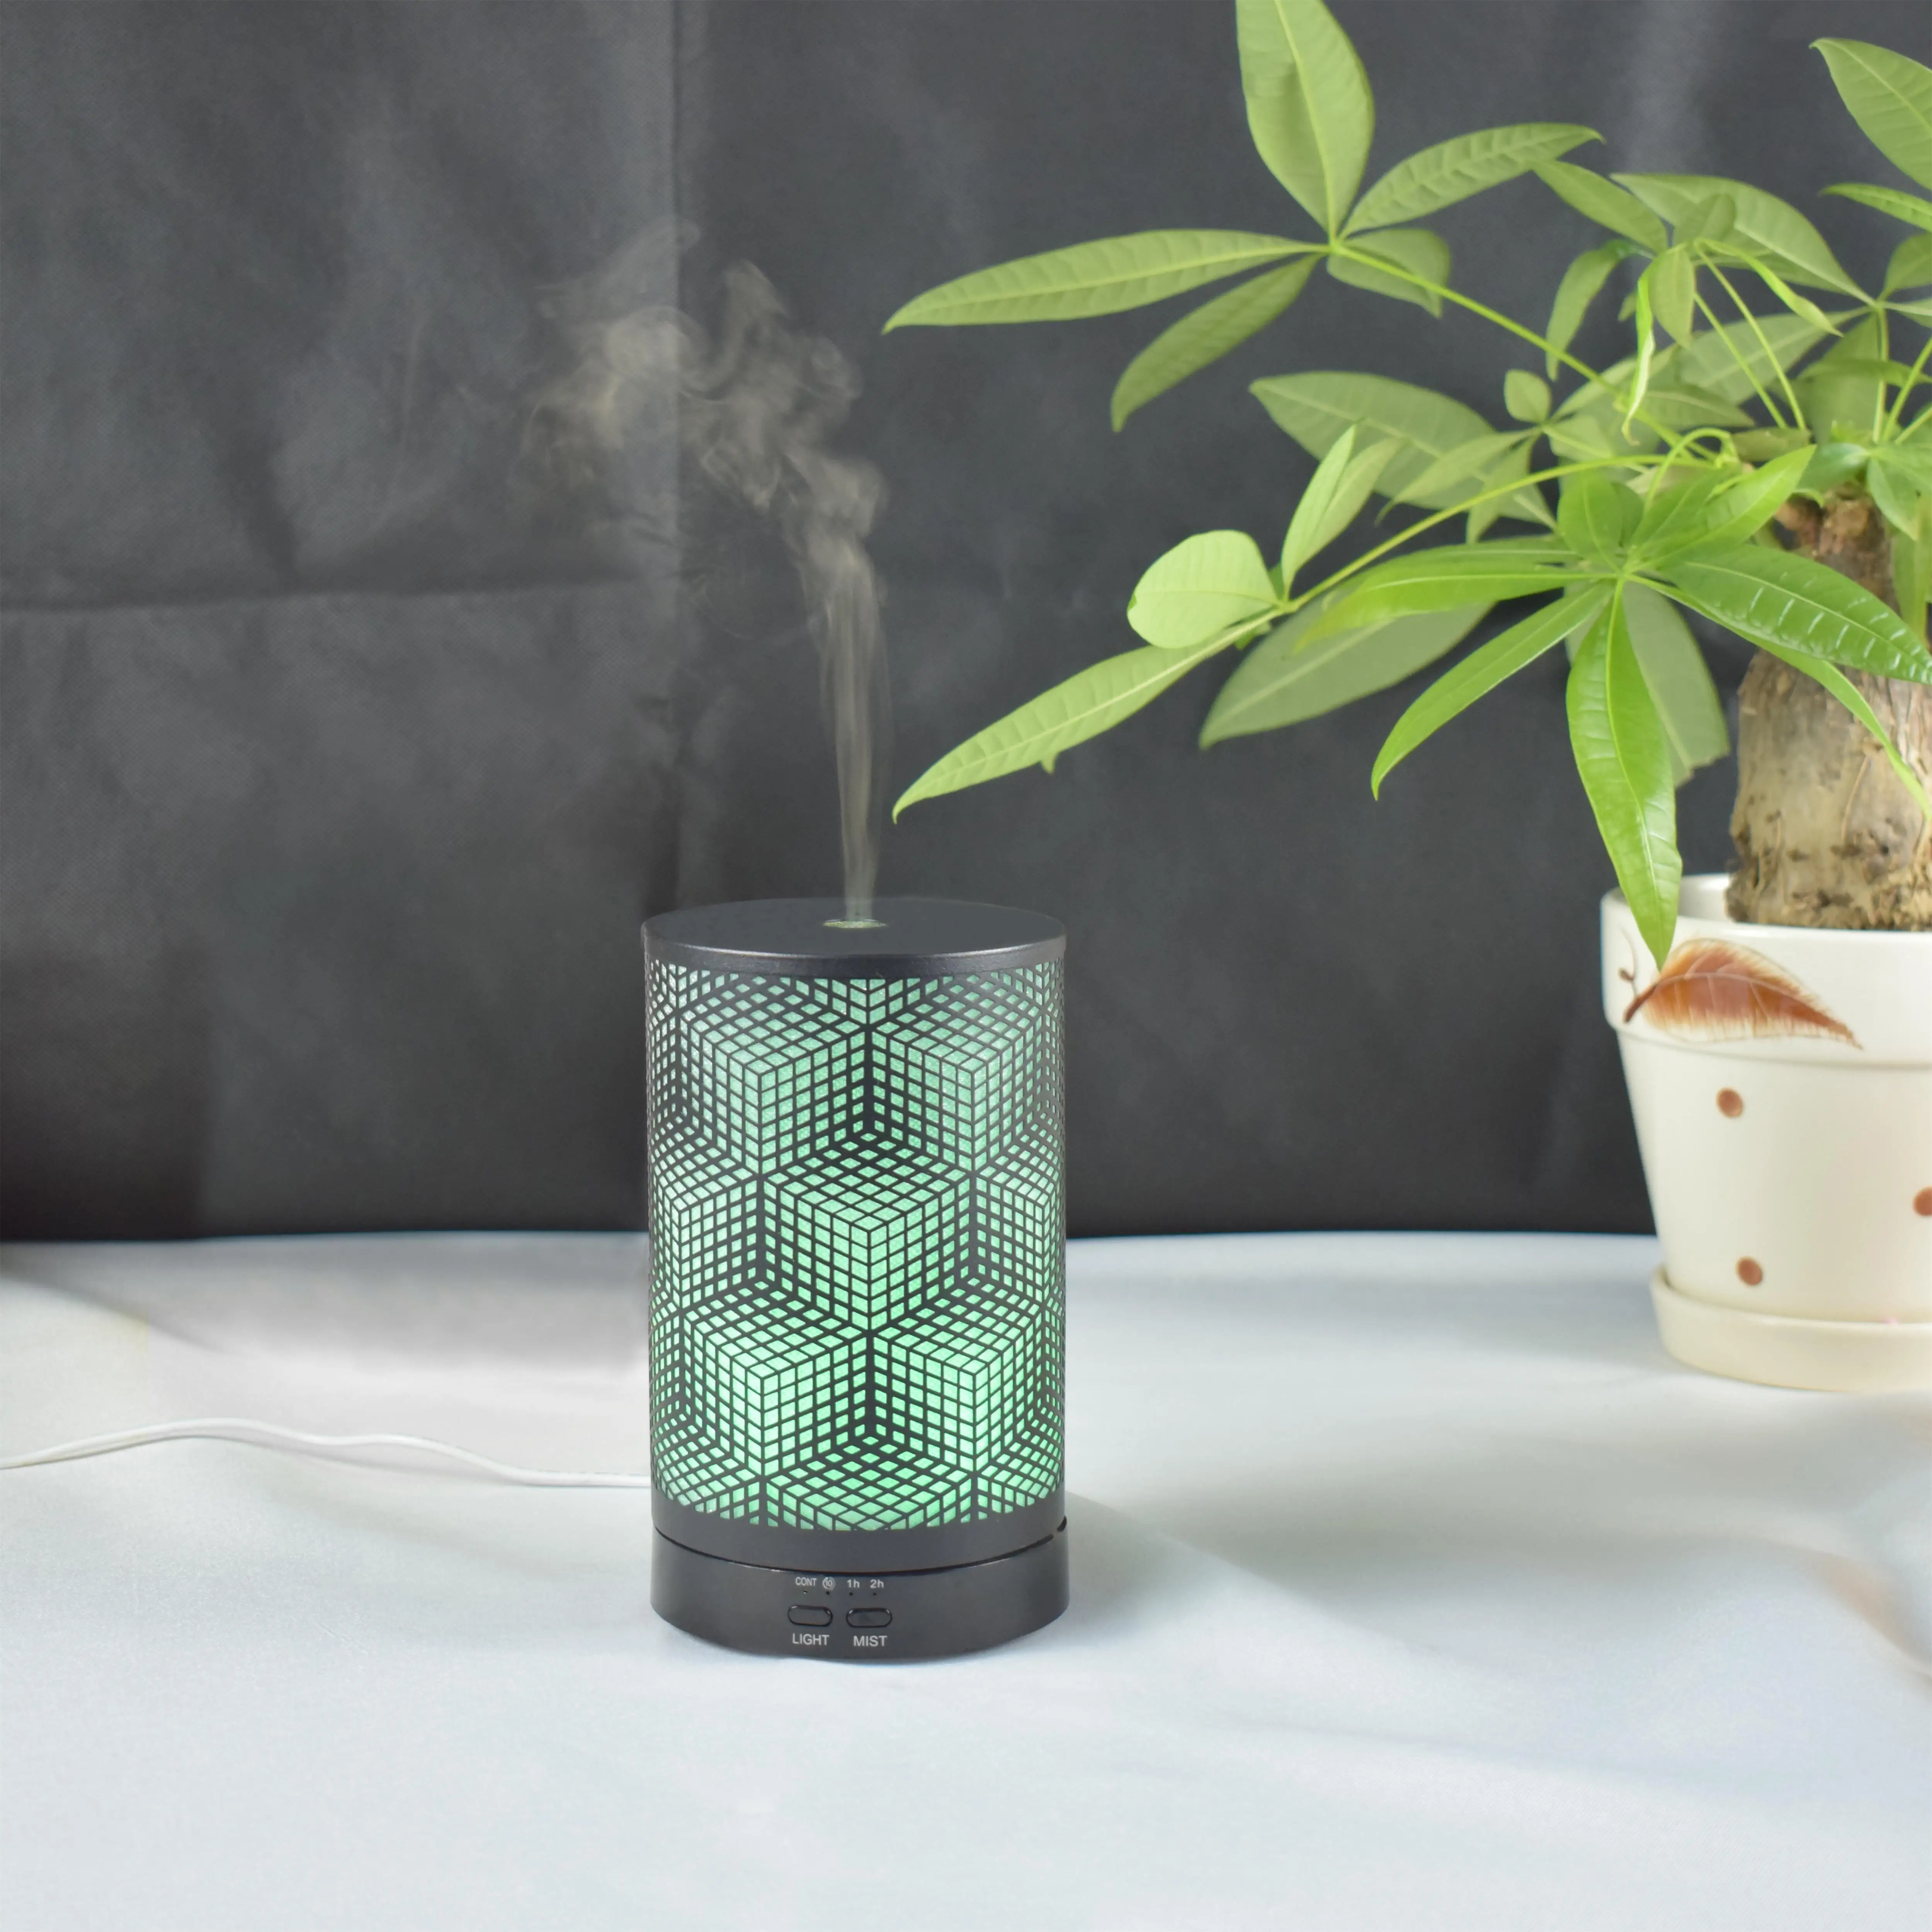 Decorative ultrasonic essential oil diffuser iron metal cool mist himudifier for home